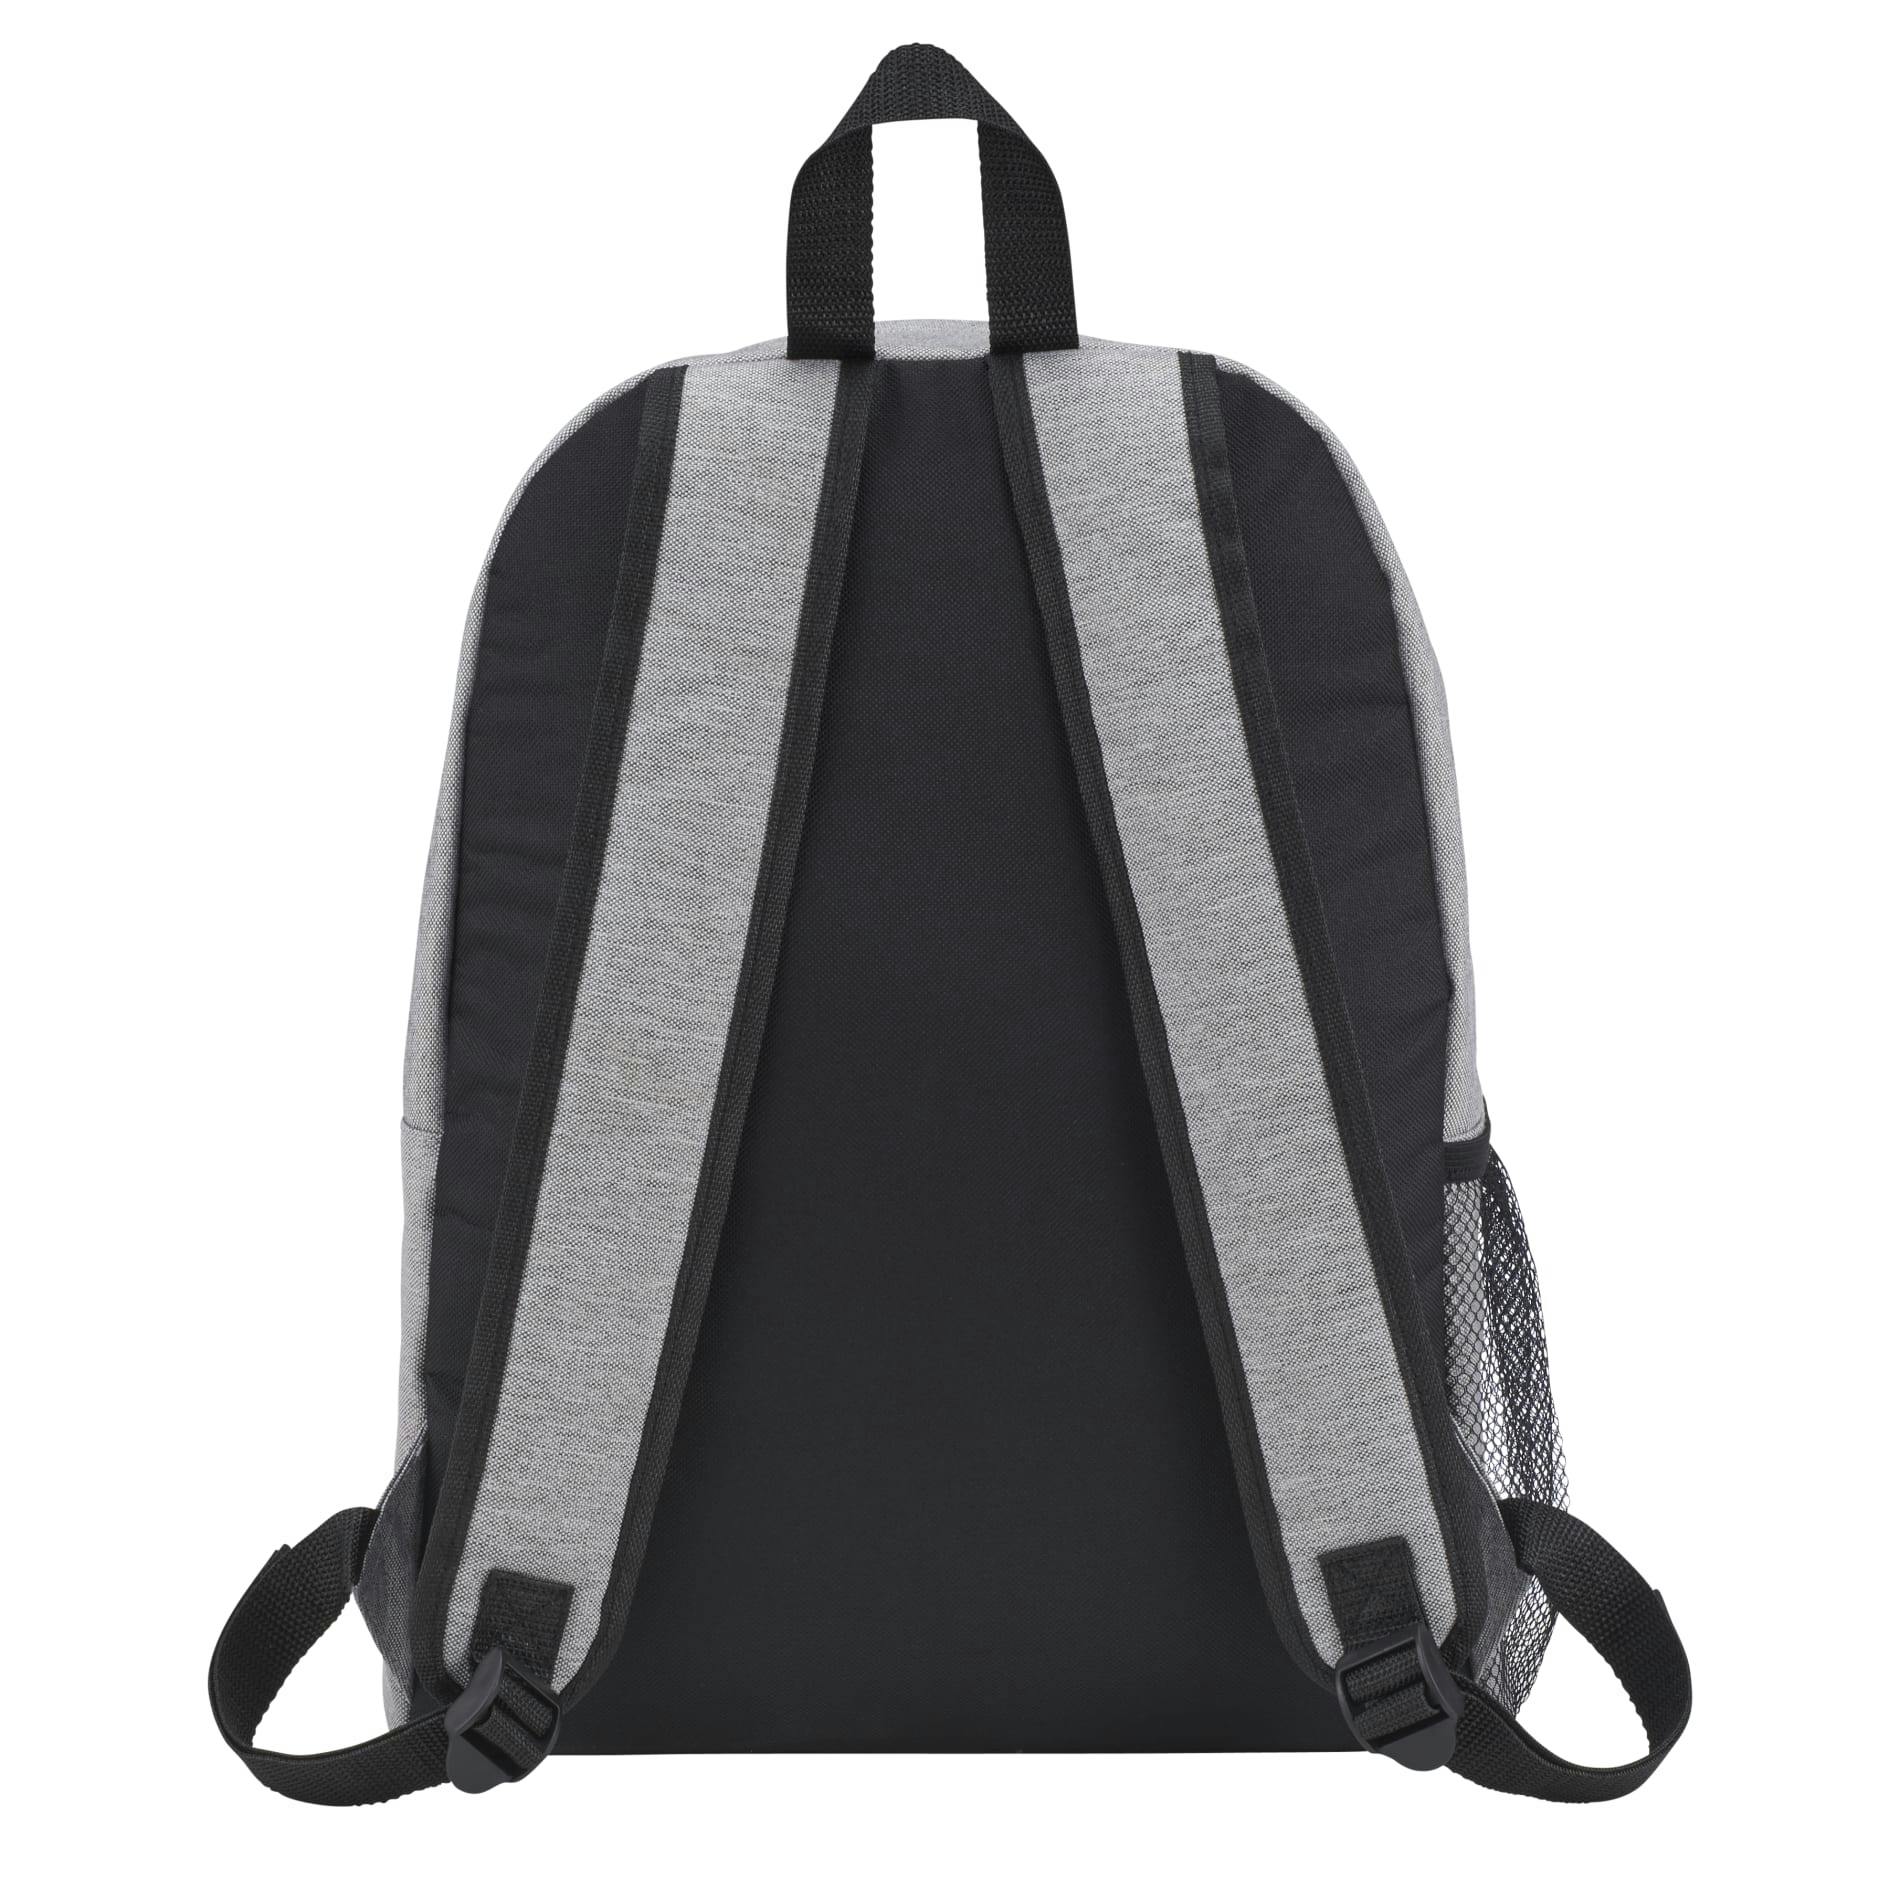 Merchant & Craft Revive RPET Waist Pack Backpack - additional Image 1